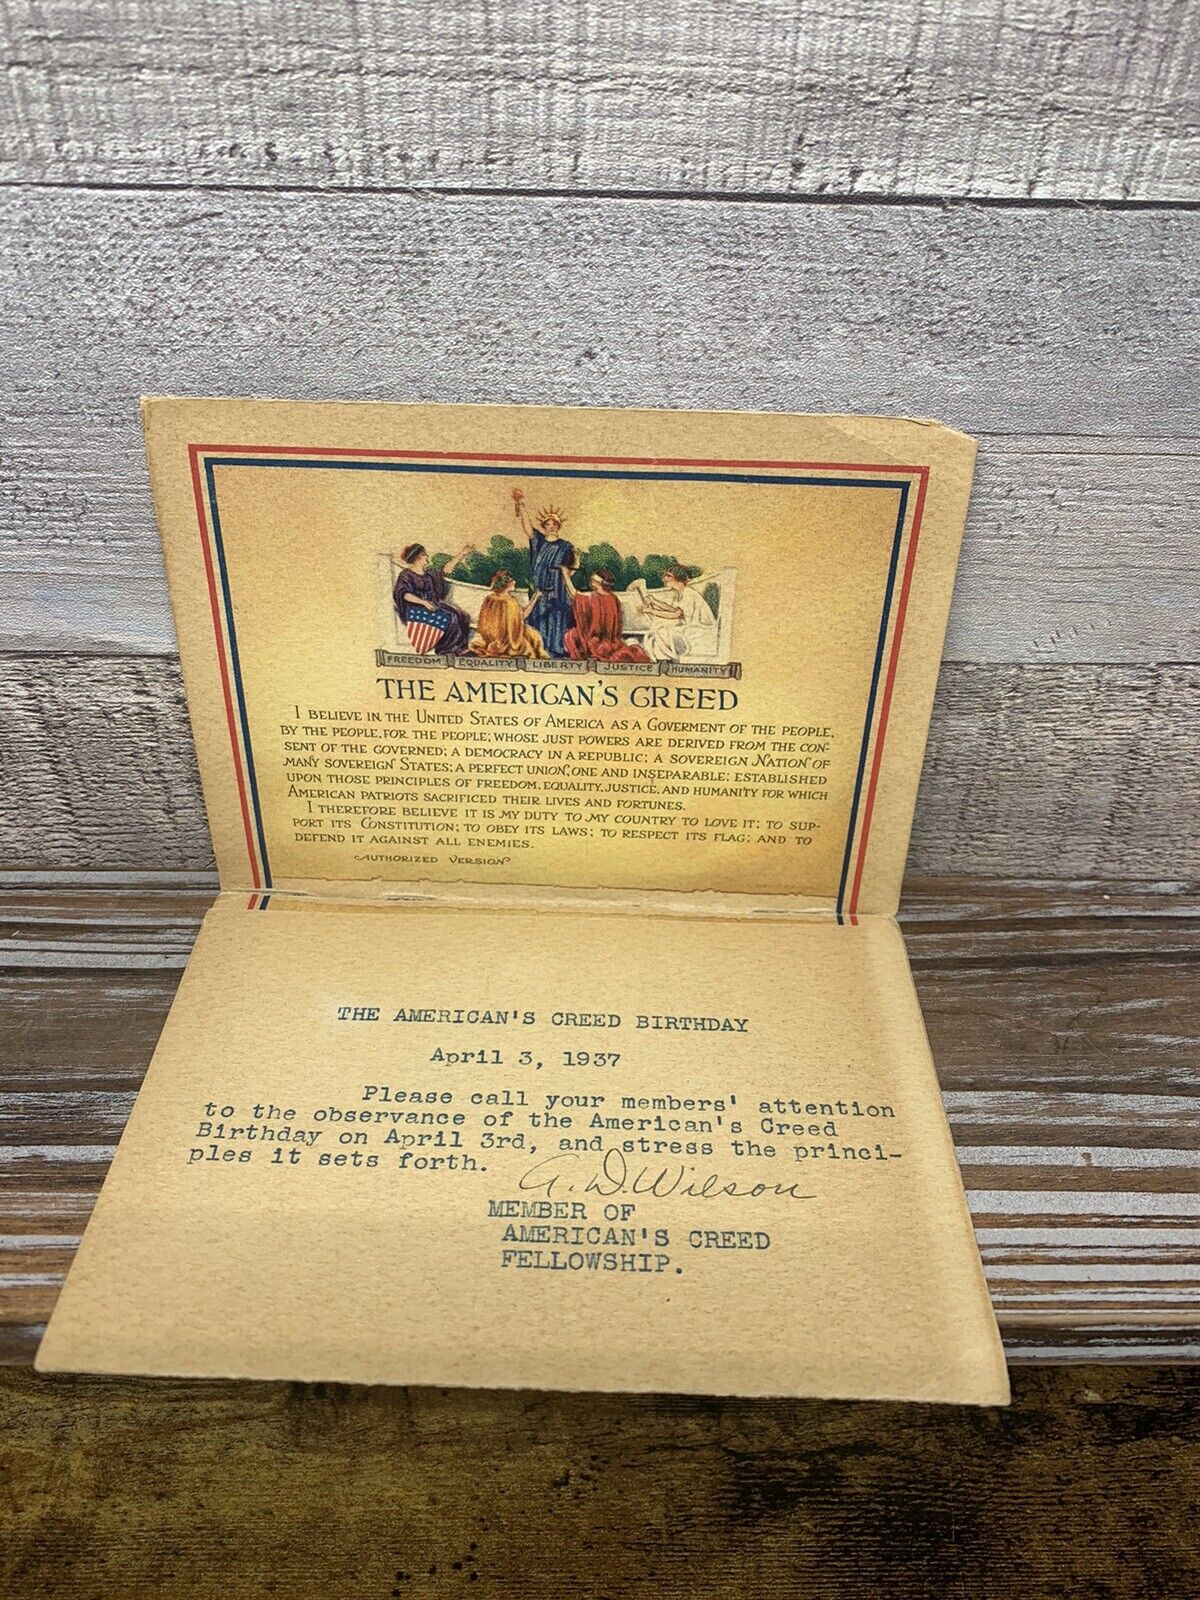 Vintage 1930’s American Creed Birthday Invitation Stamped Fellowship